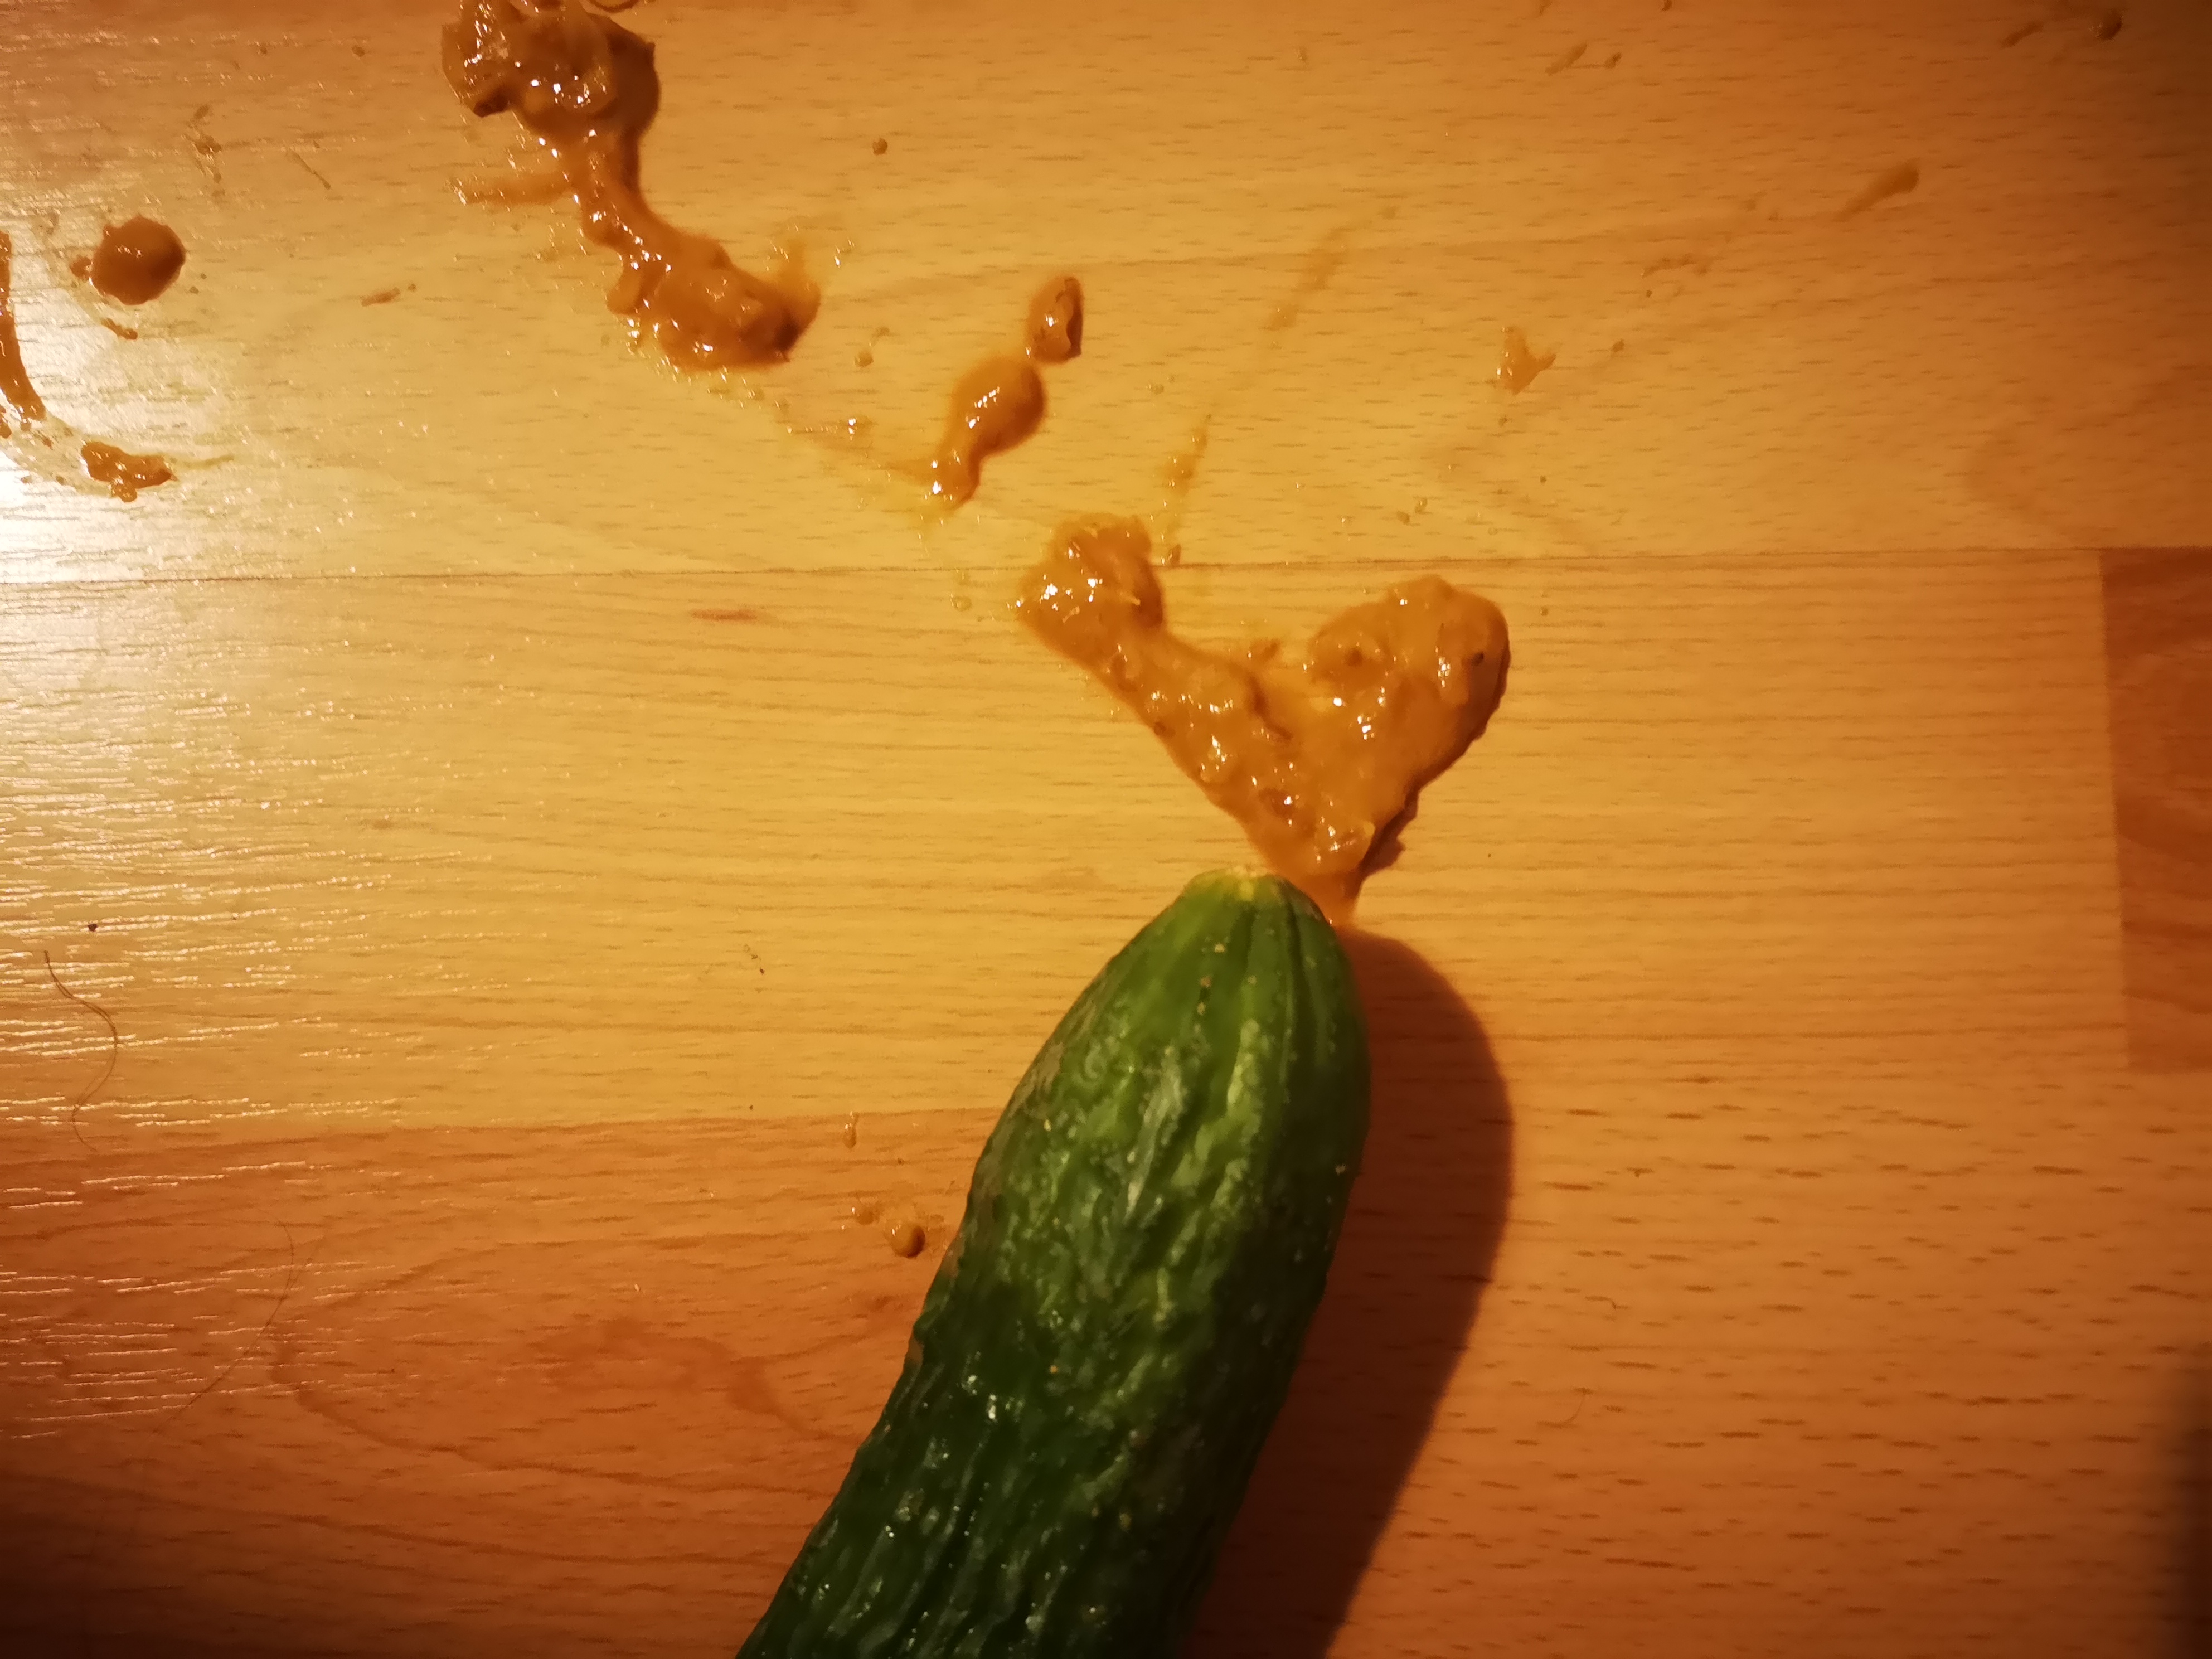 Shitty anal with cucumber